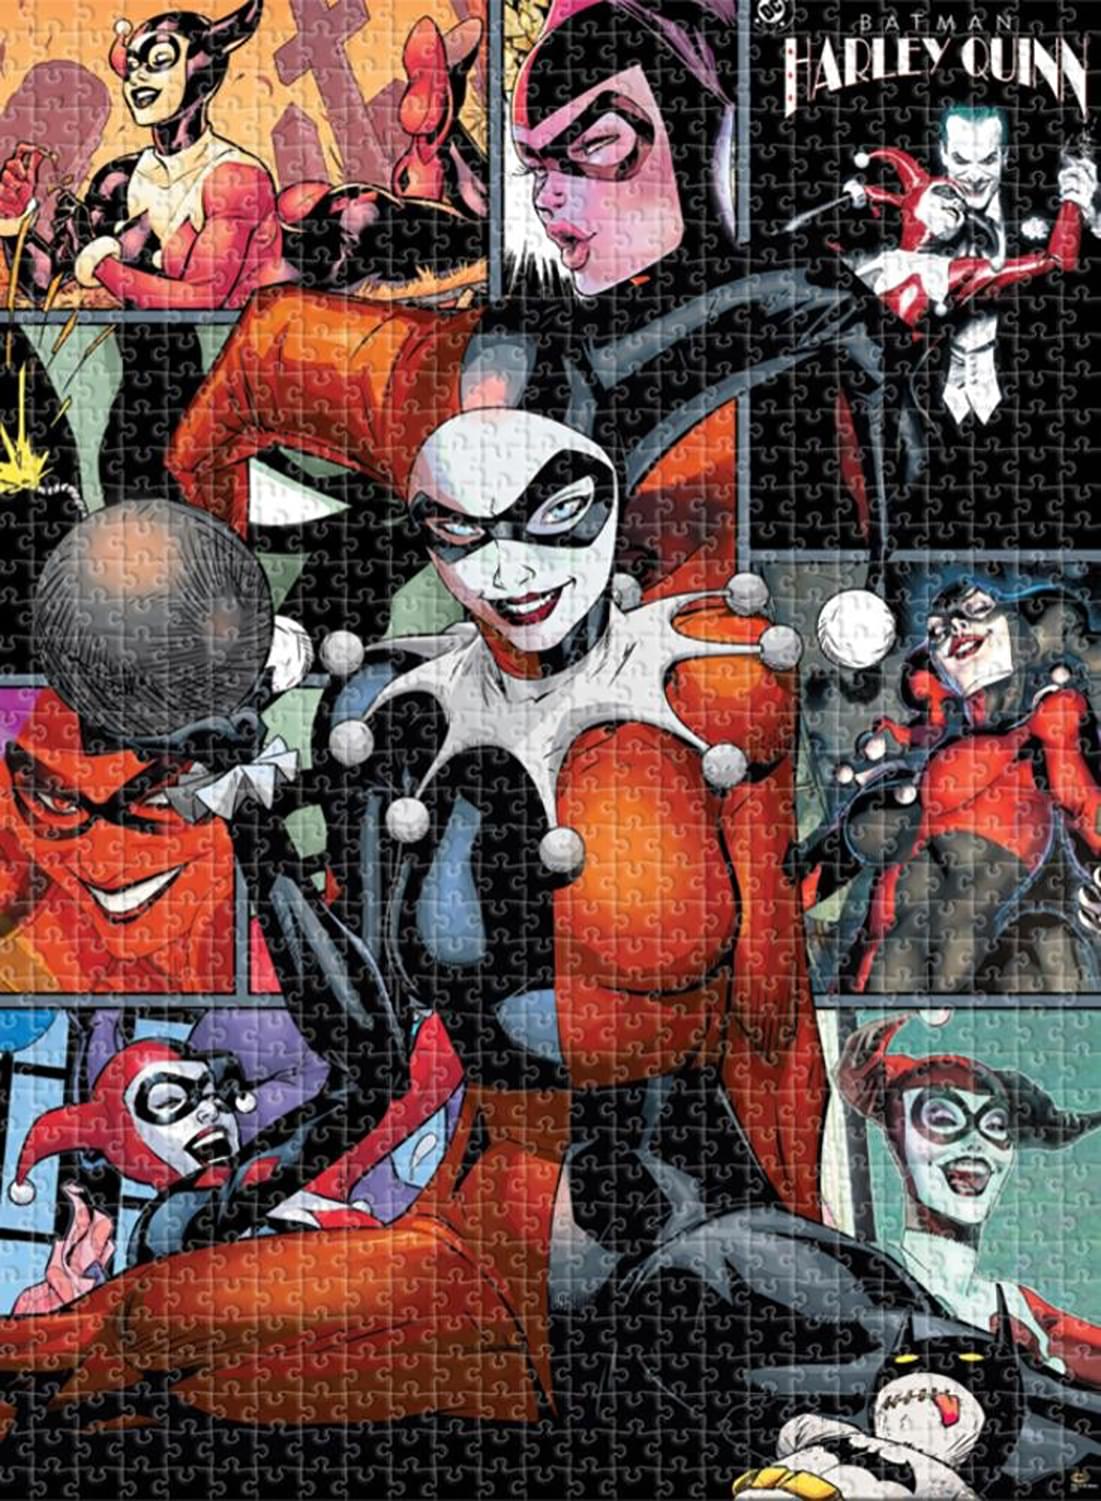 DC Comics Harley Quinn Collage 1000 Piece Jigsaw Puzzle